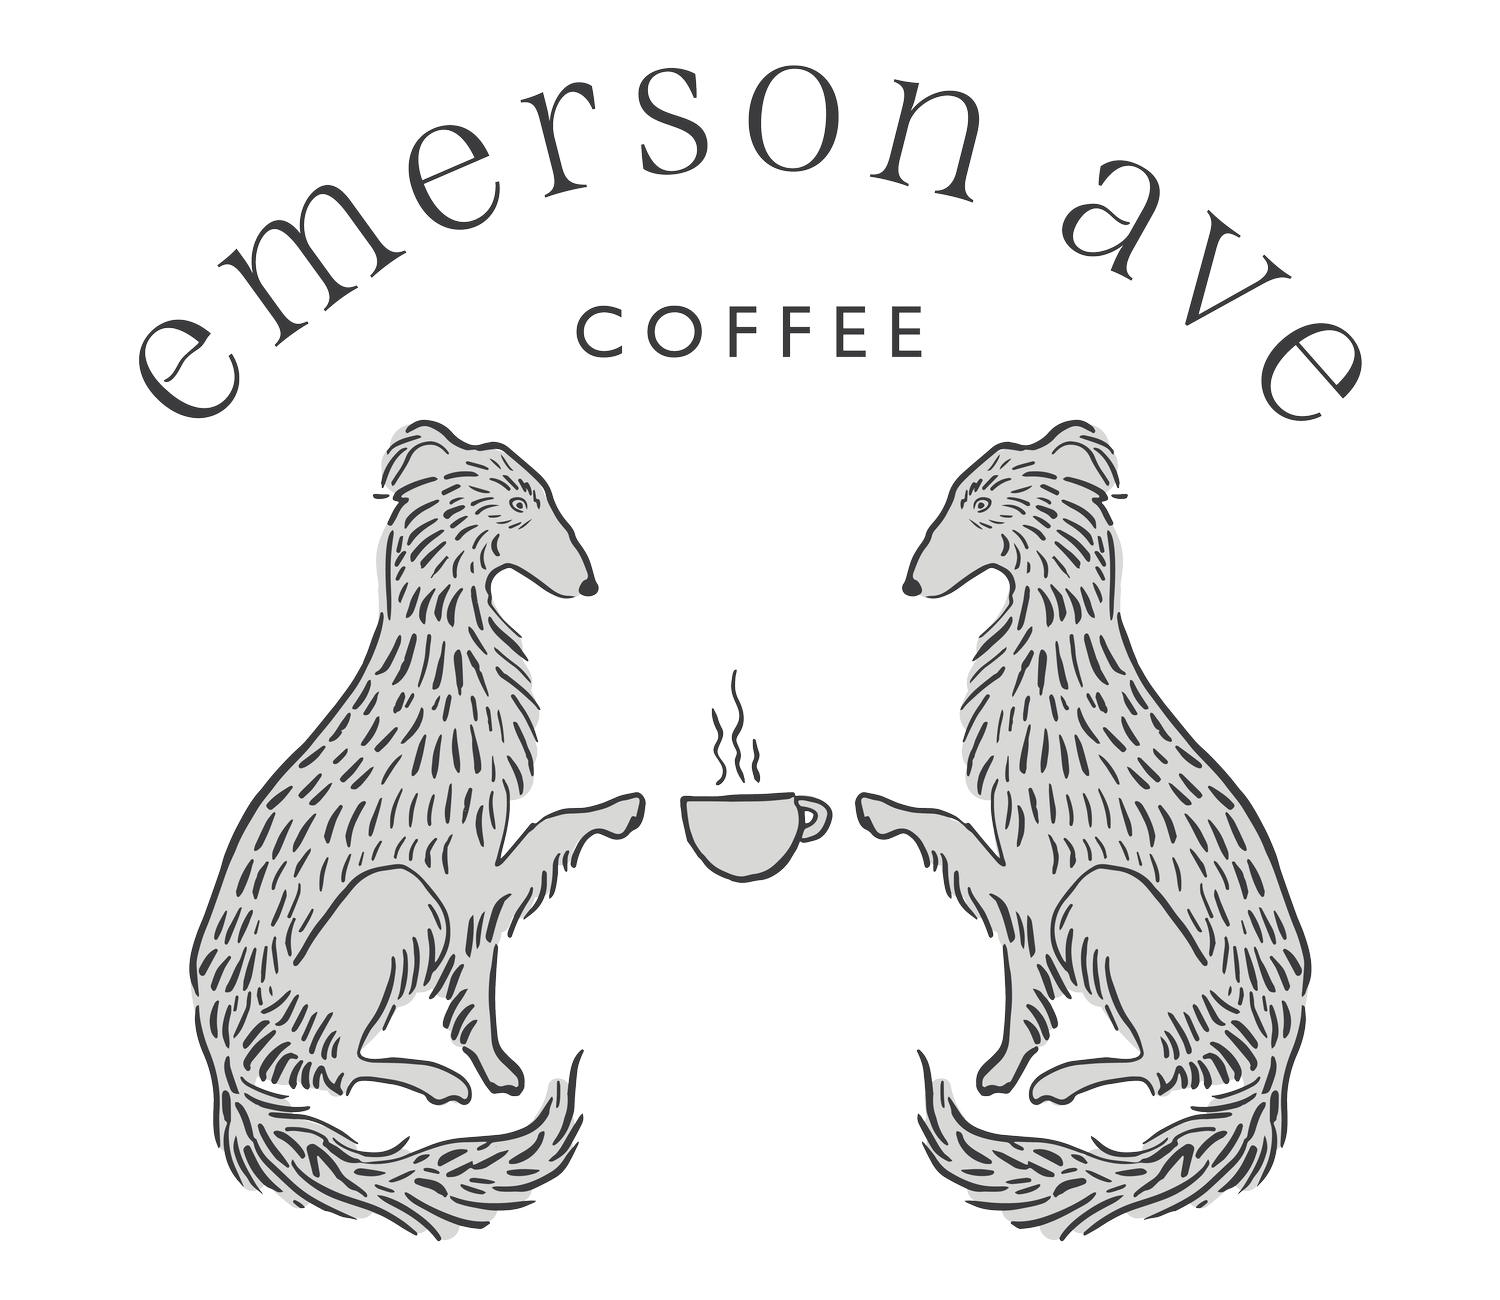 Emerson Ave Coffee